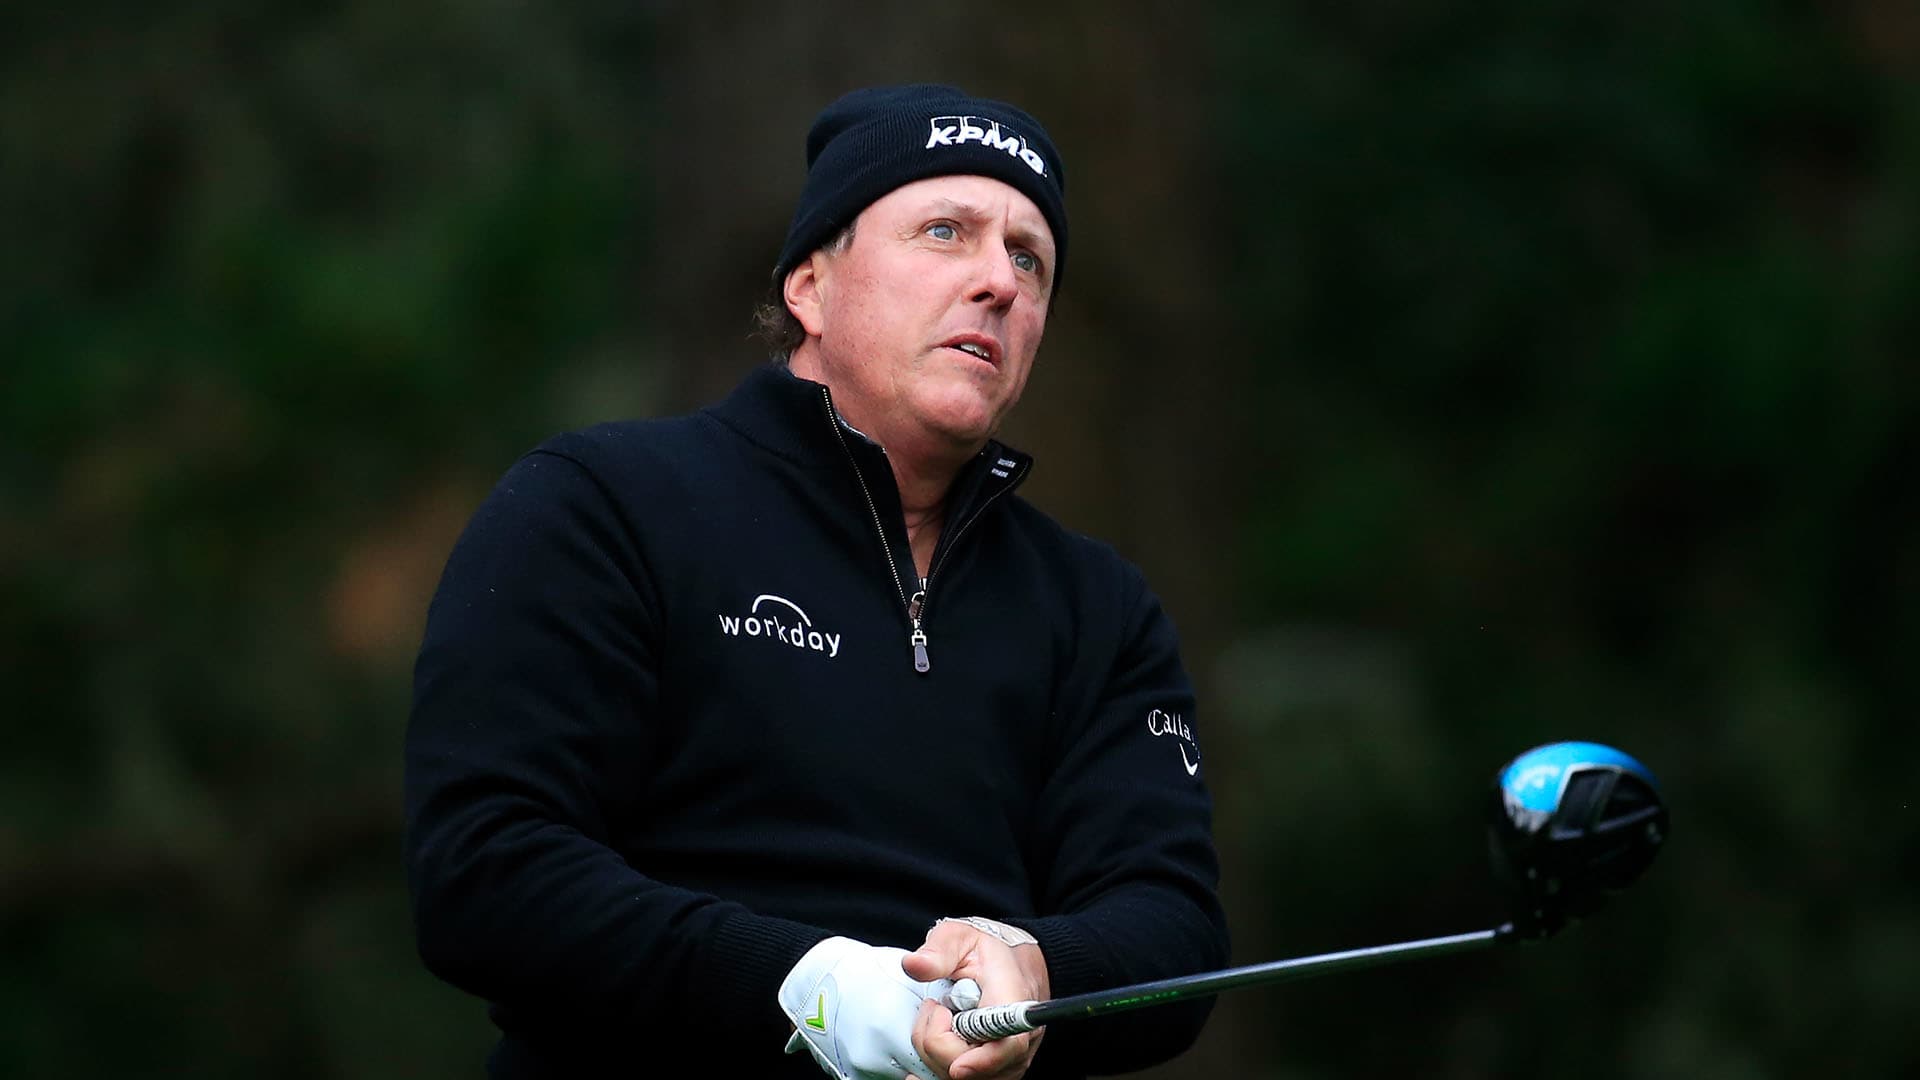 Jordan Spieth Phil Mickelson Tied For Lead At Suspended T